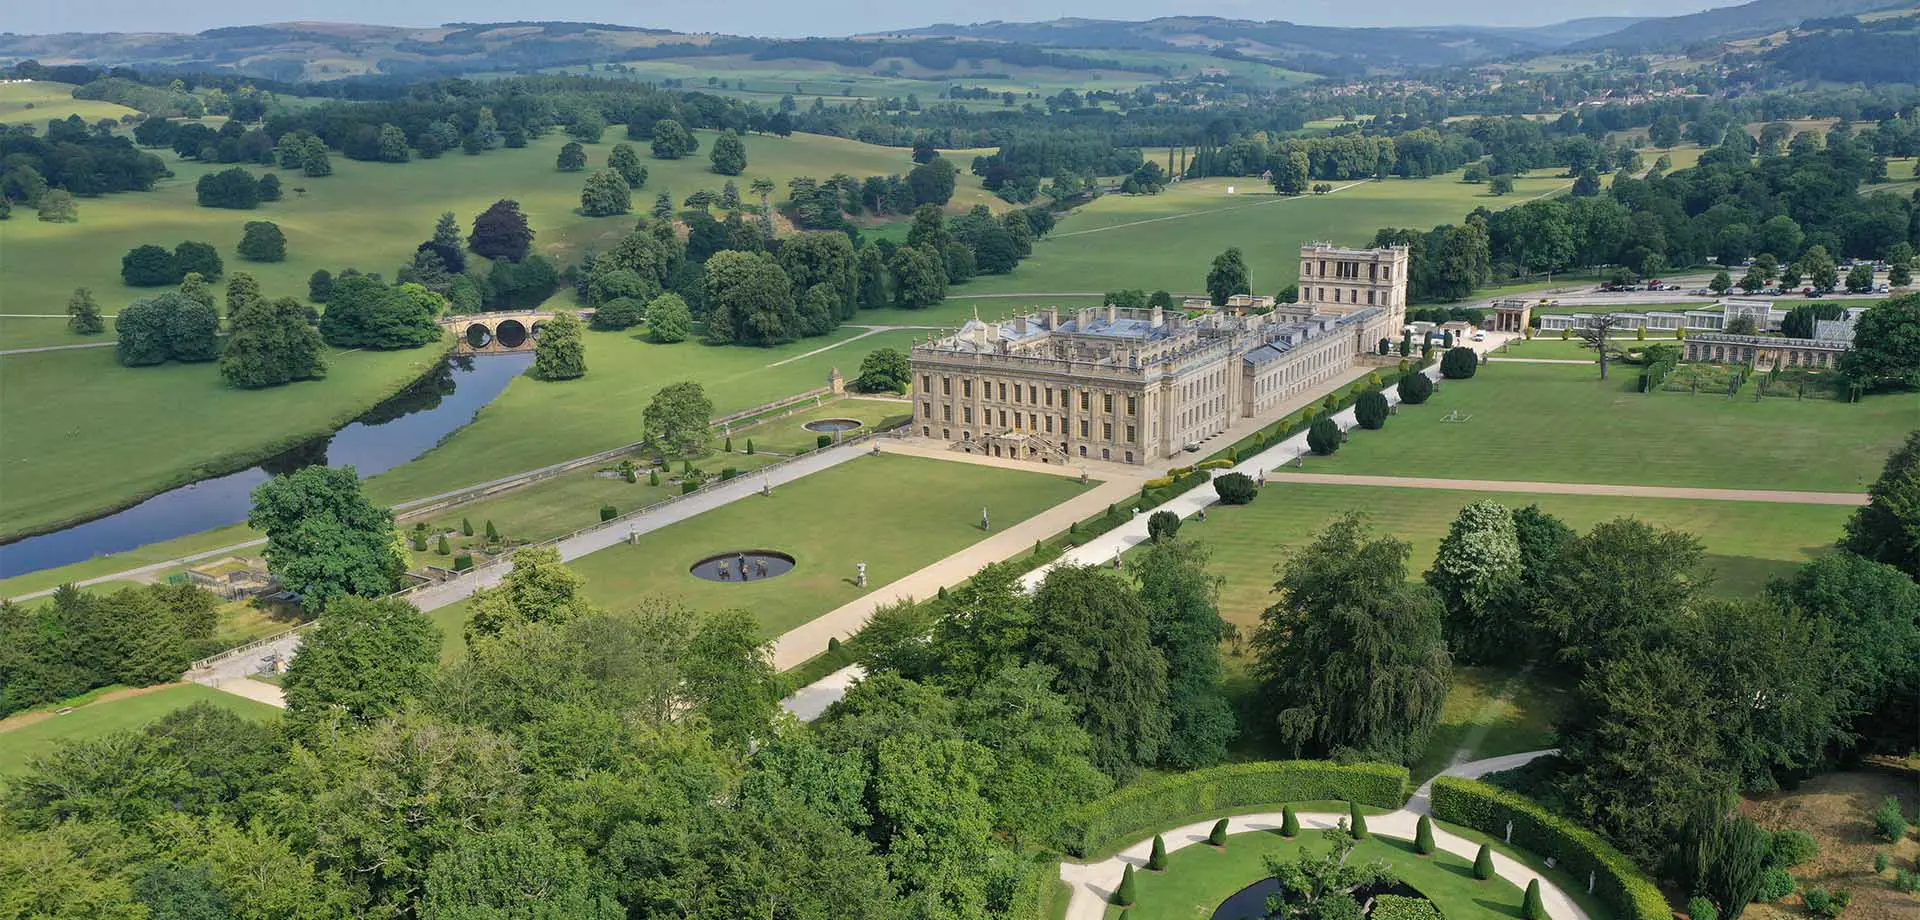 Your visit to Chatsworth